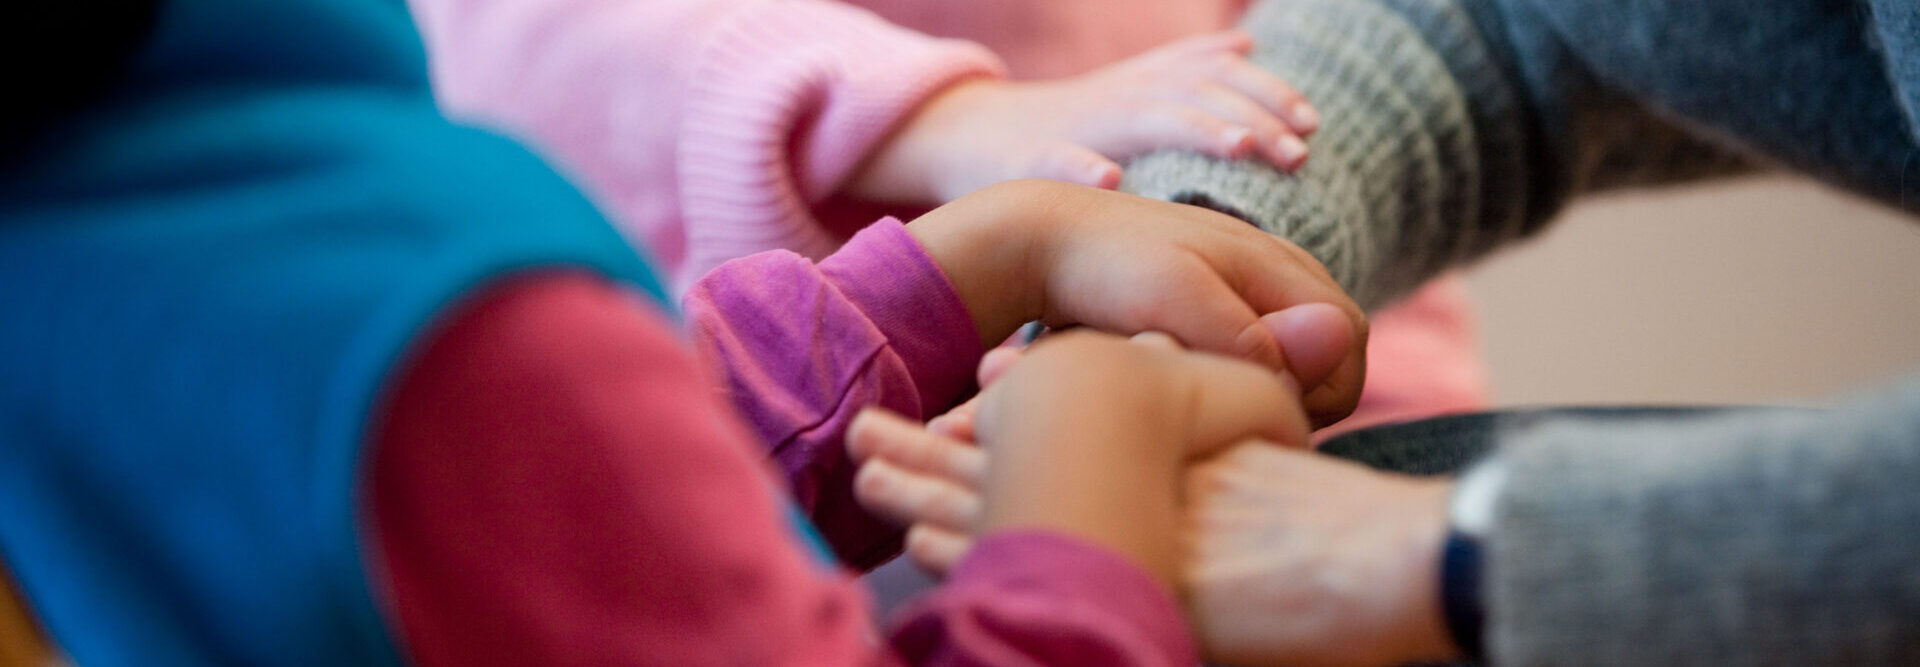 The hands of a child rest on those of an adult person. The hand of another child lies on the forearm of the adult. The image radiates closeness and trust and lives on warm shades of gray-pink-purple-blue.